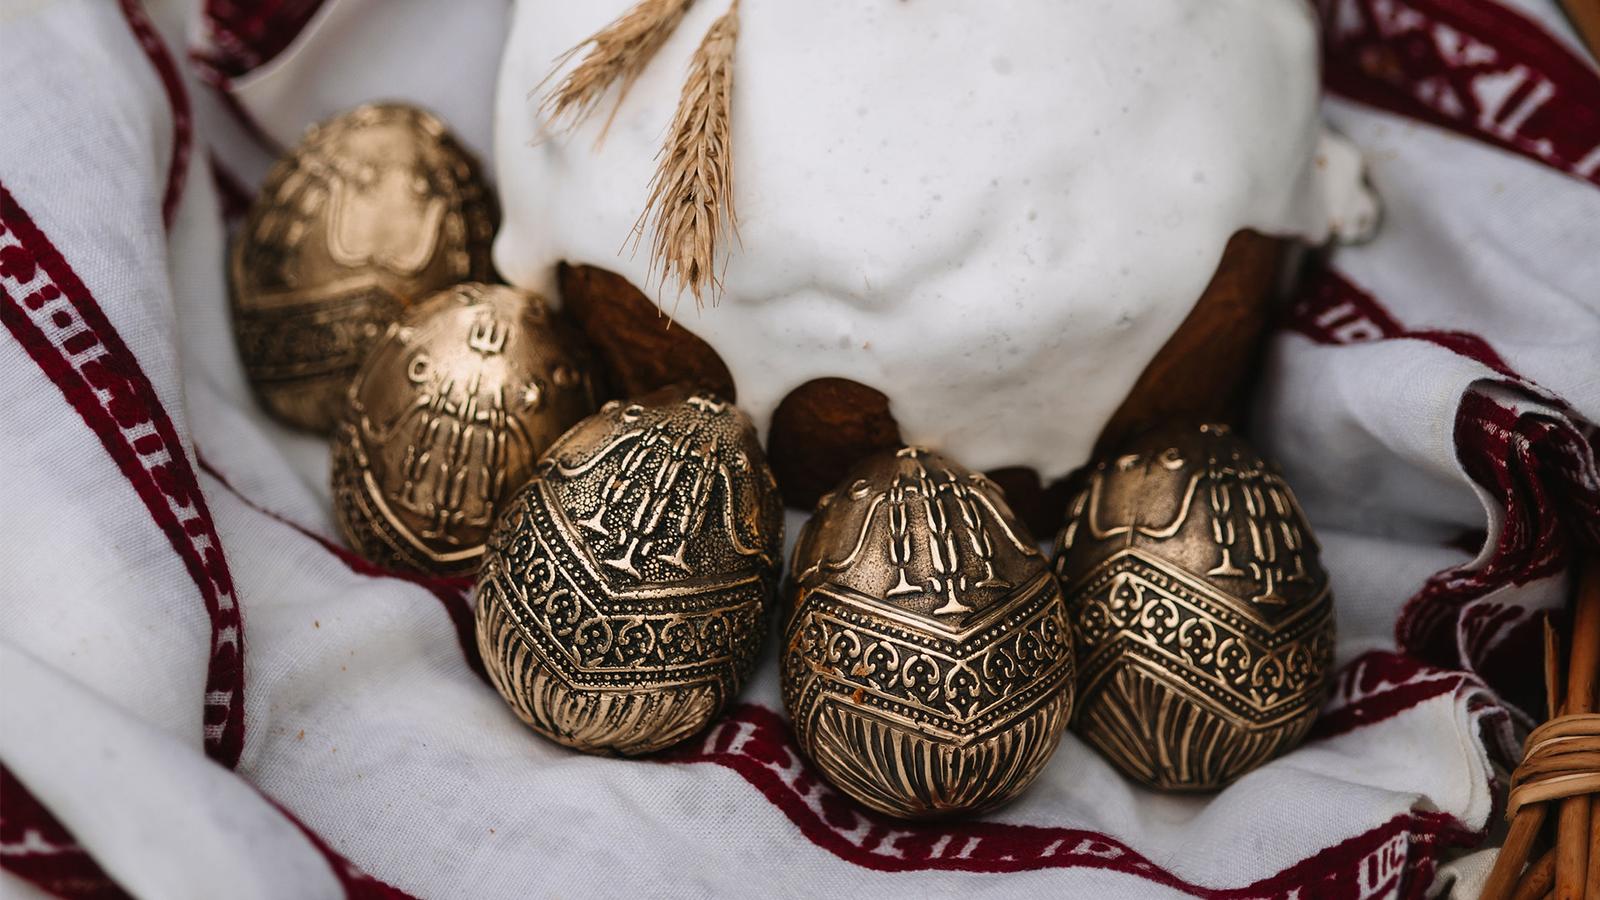 The raffle of ponad's artisan Easter eggs is over